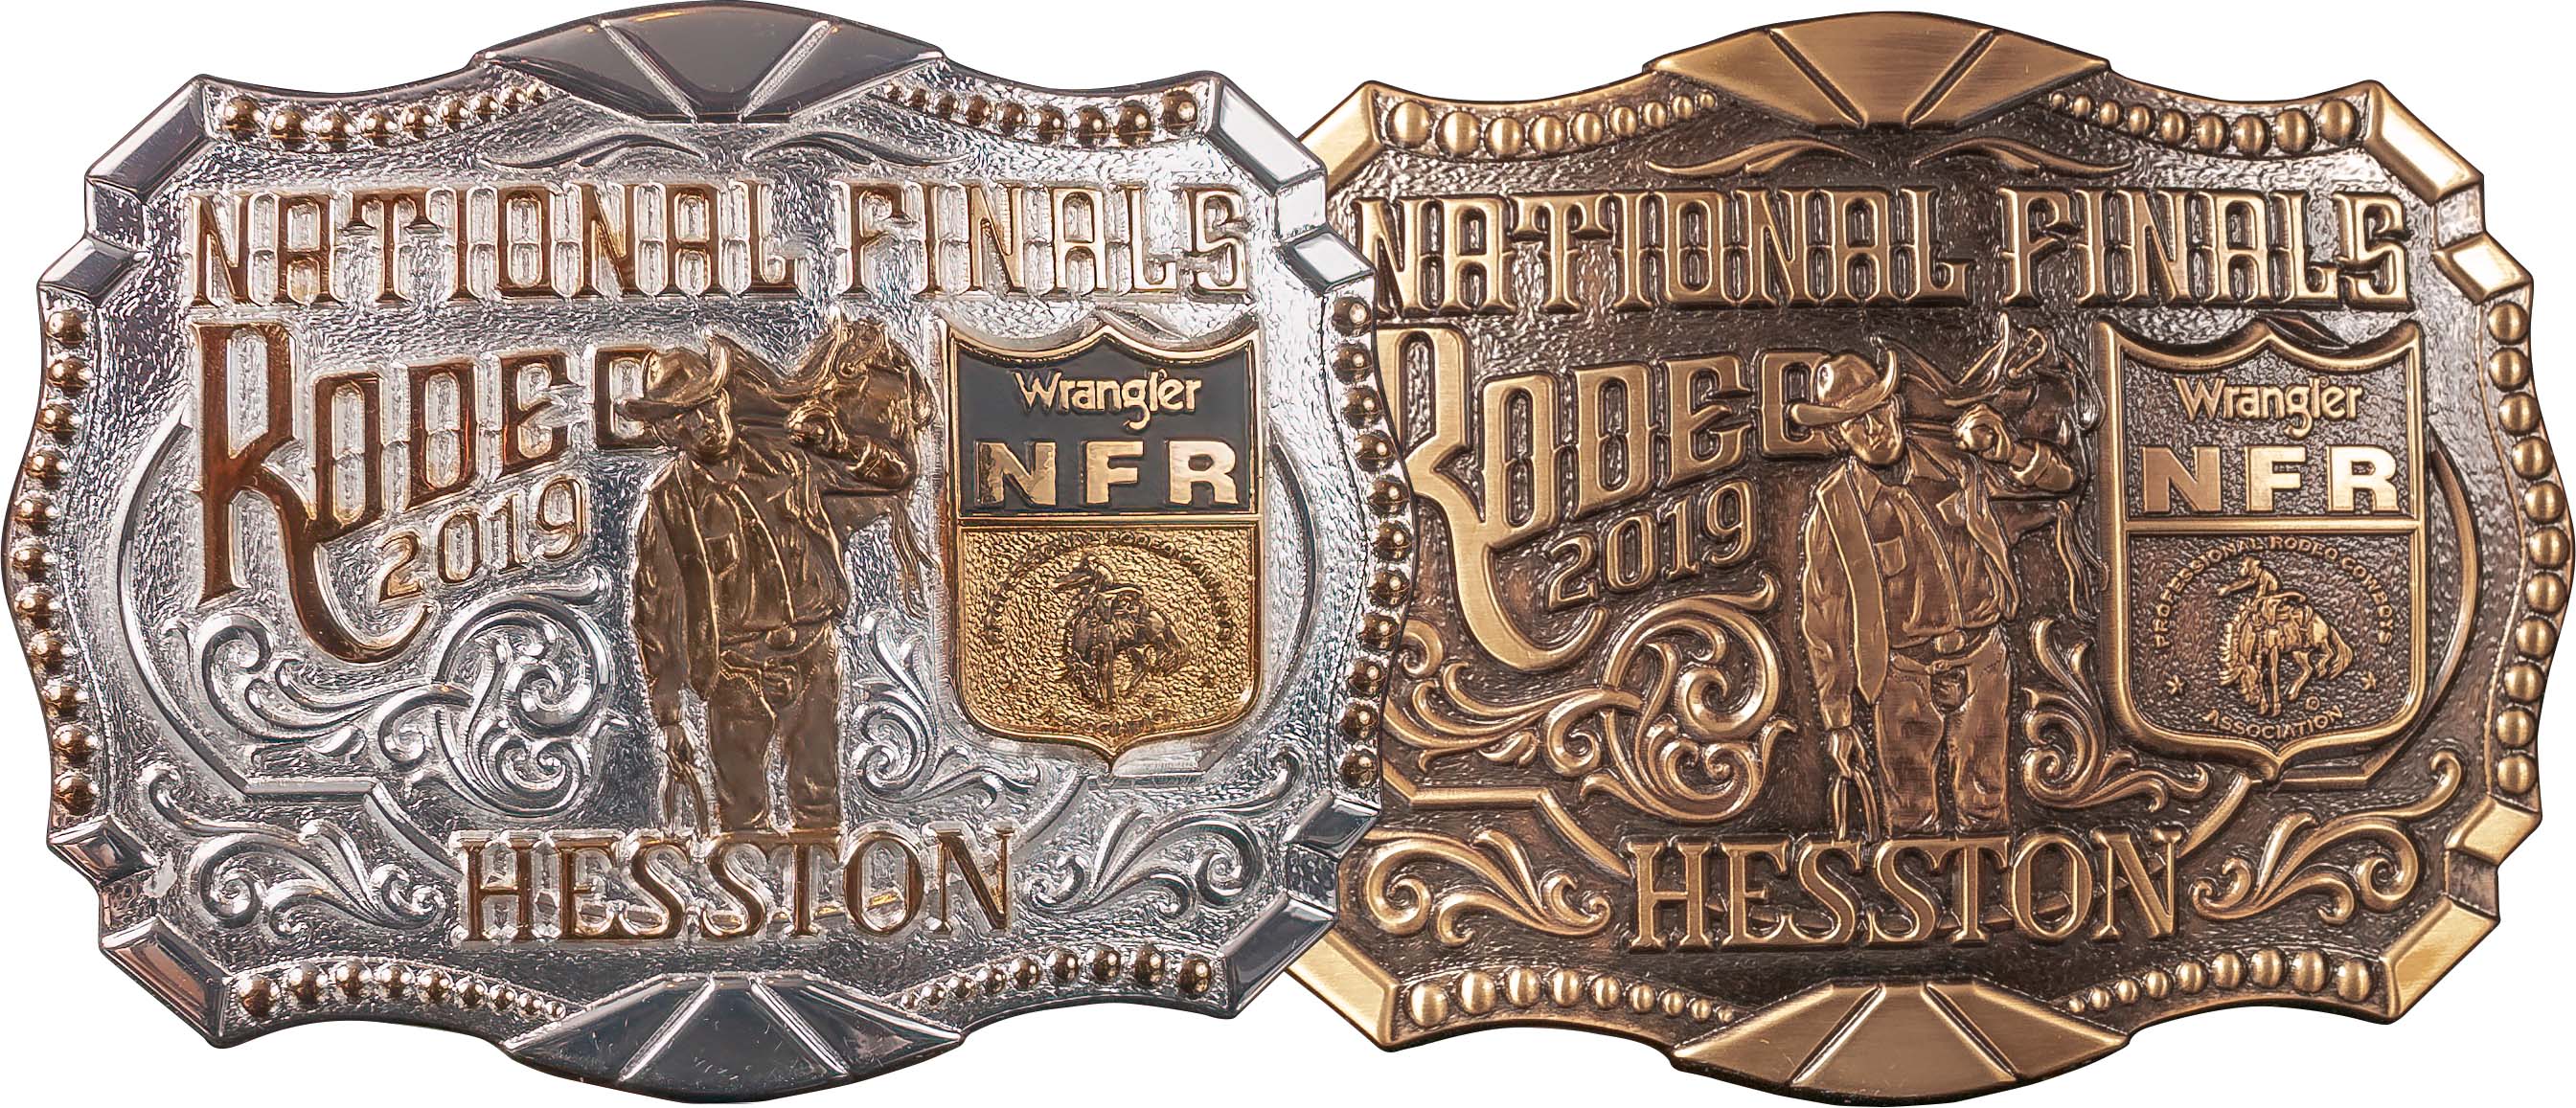 2014 Hesston National Finals Rodeo Youth Belt Buckle